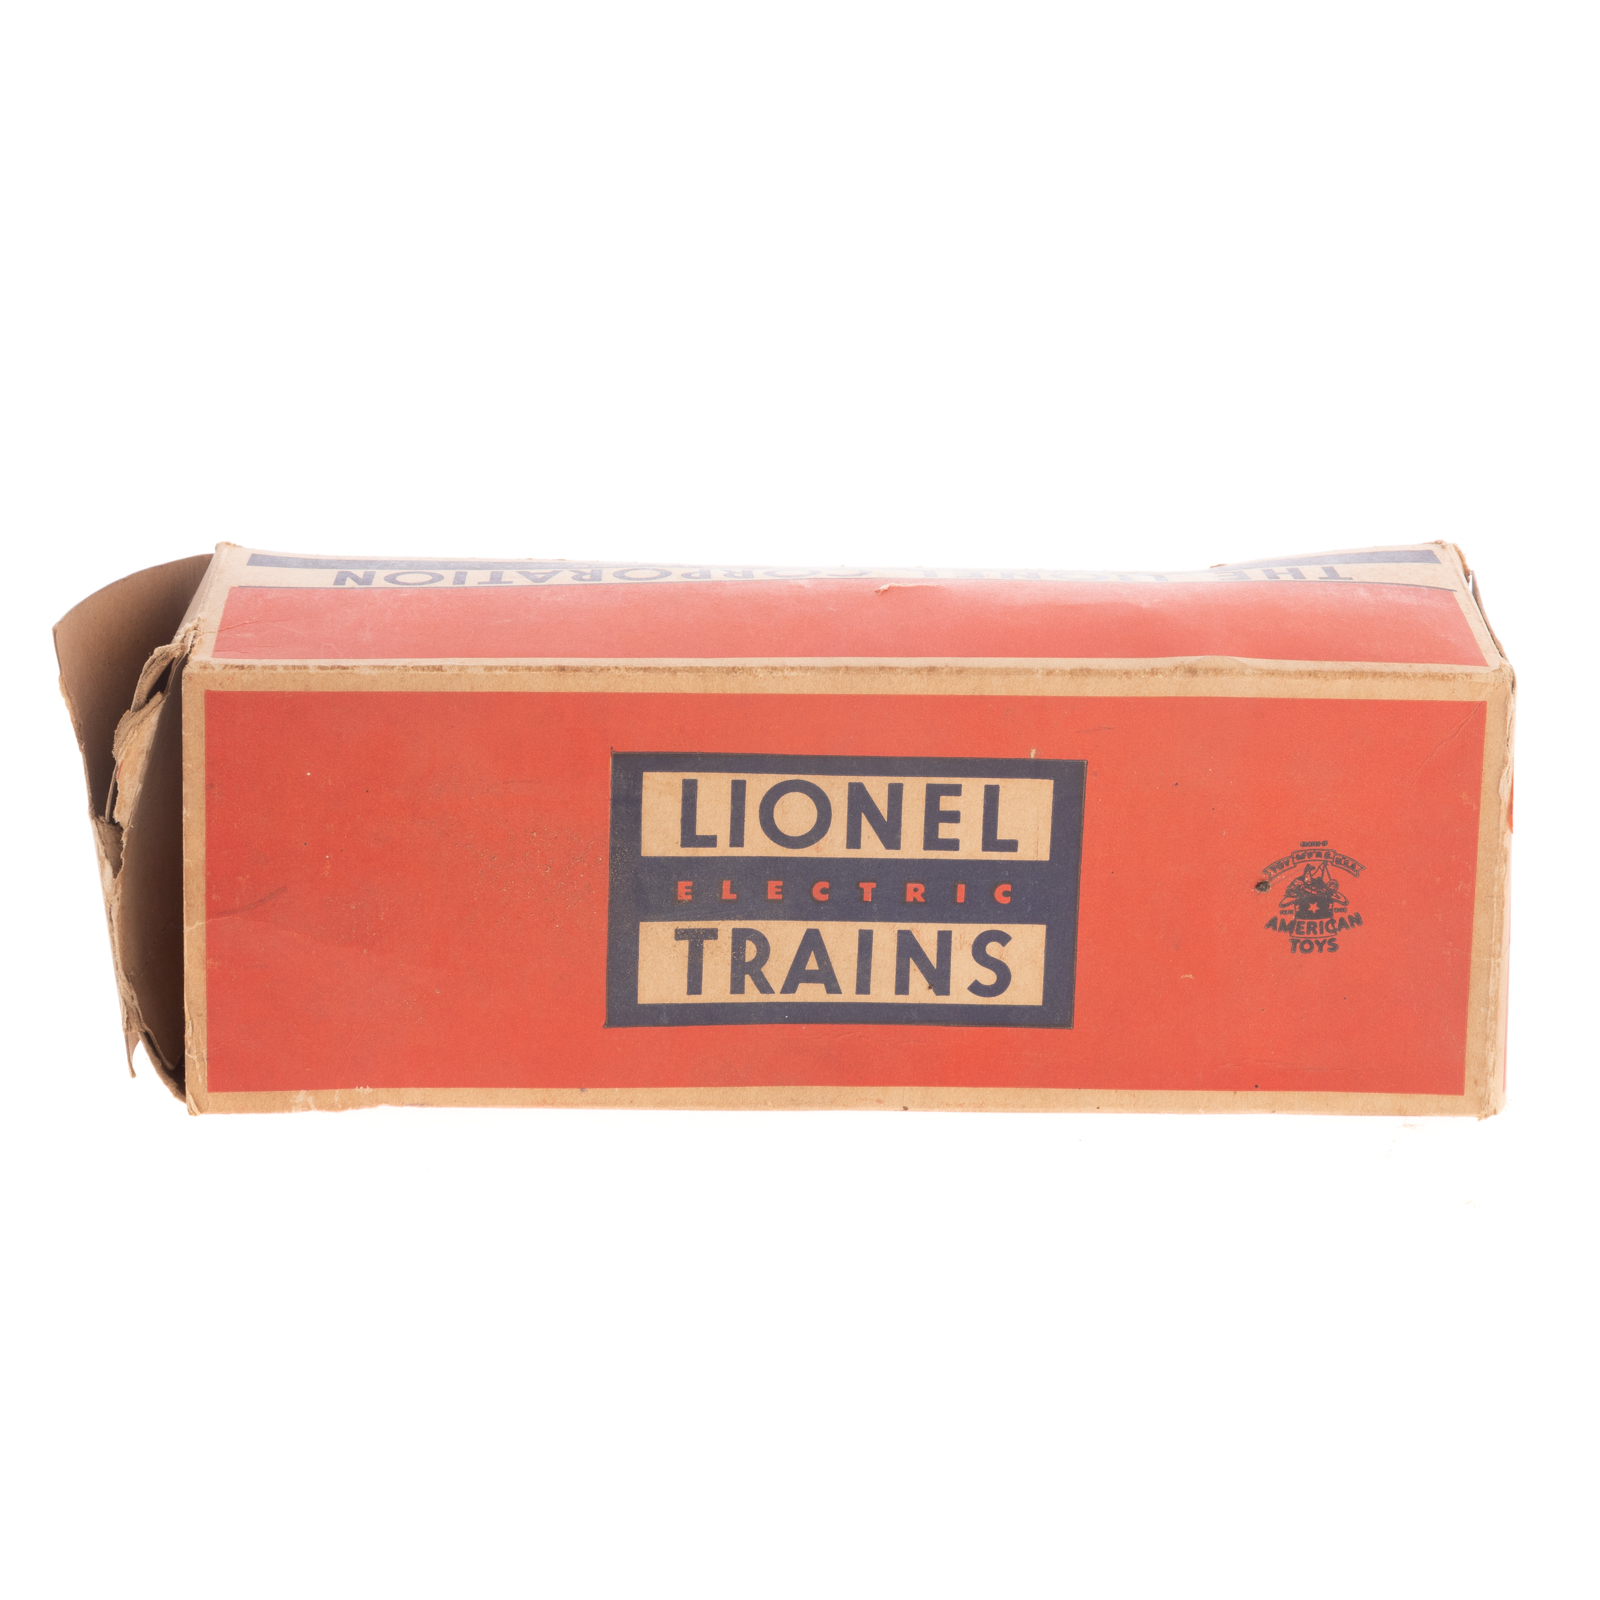 LIONEL TRACK CLEANING CAR No. 3927,